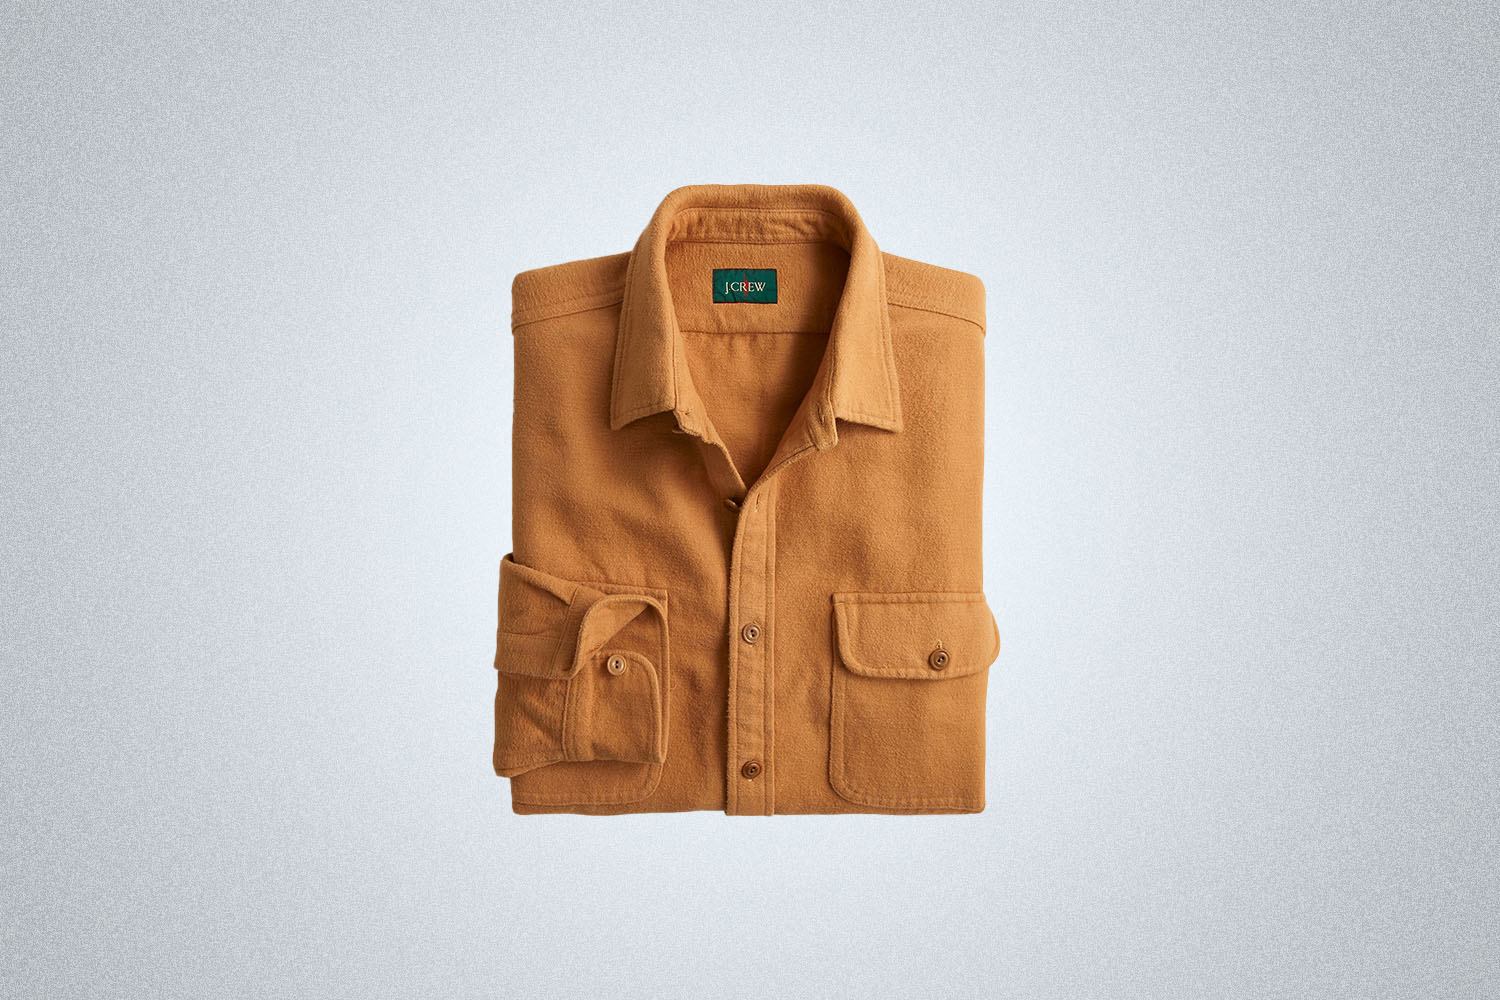 Save Up To 40% On the Latest J.Crew Sale - InsideHook